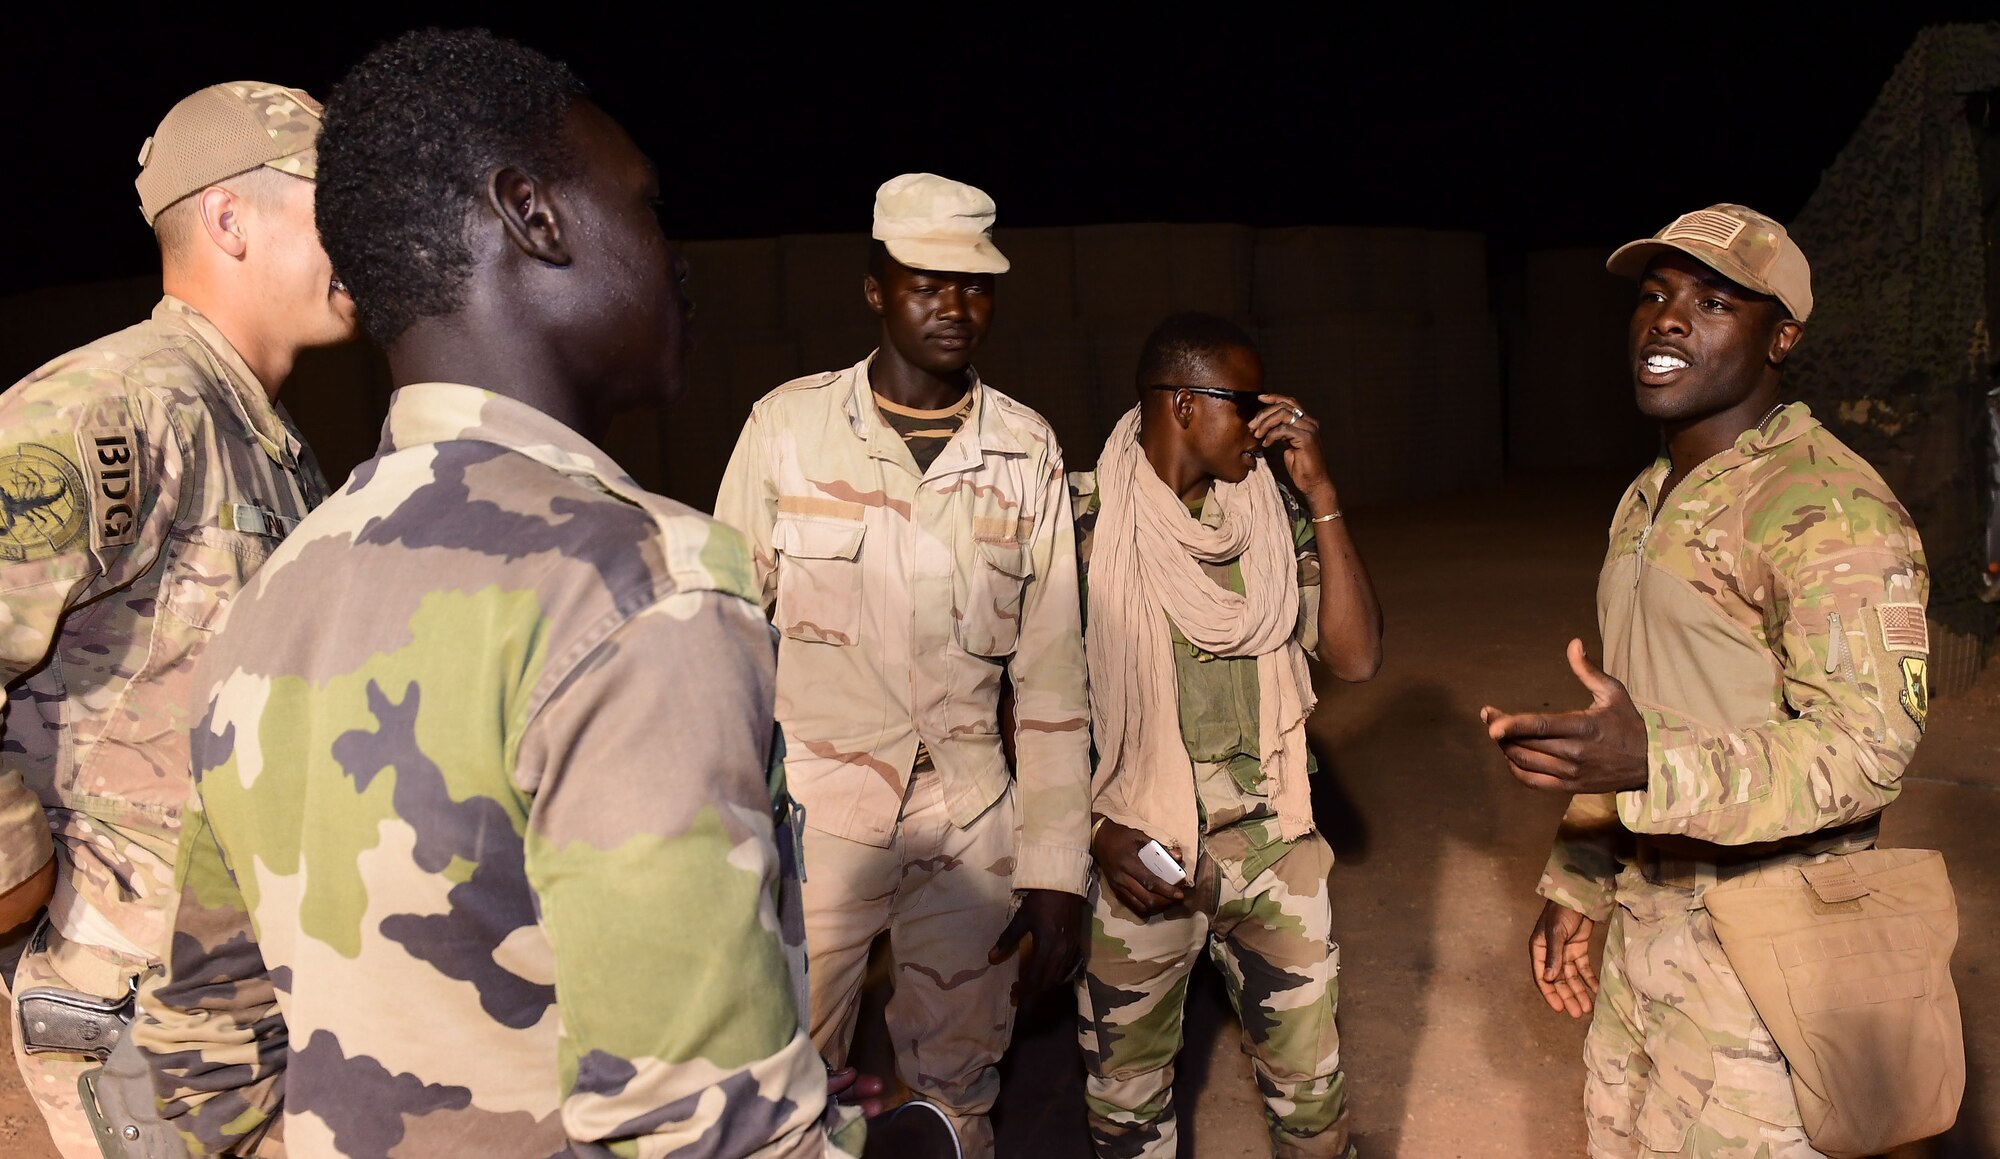 U.S. Air Force Staff Sgt. Mackenzie Isidor, 822nd Expeditionary Base Defense Squadron fire team leader, briefs Airmen and members of the Forces Armées Nigeriennes, during a night shift at Nigerien Air Base 201, in Agadez, Niger, Feb. 26, 2018. Airmen and their host nation partners in Africa work closely in an effort to support mutual security goals and objectives in Africa. (U.S. Air Force photo by Tech. Sgt. Nick Wilson)